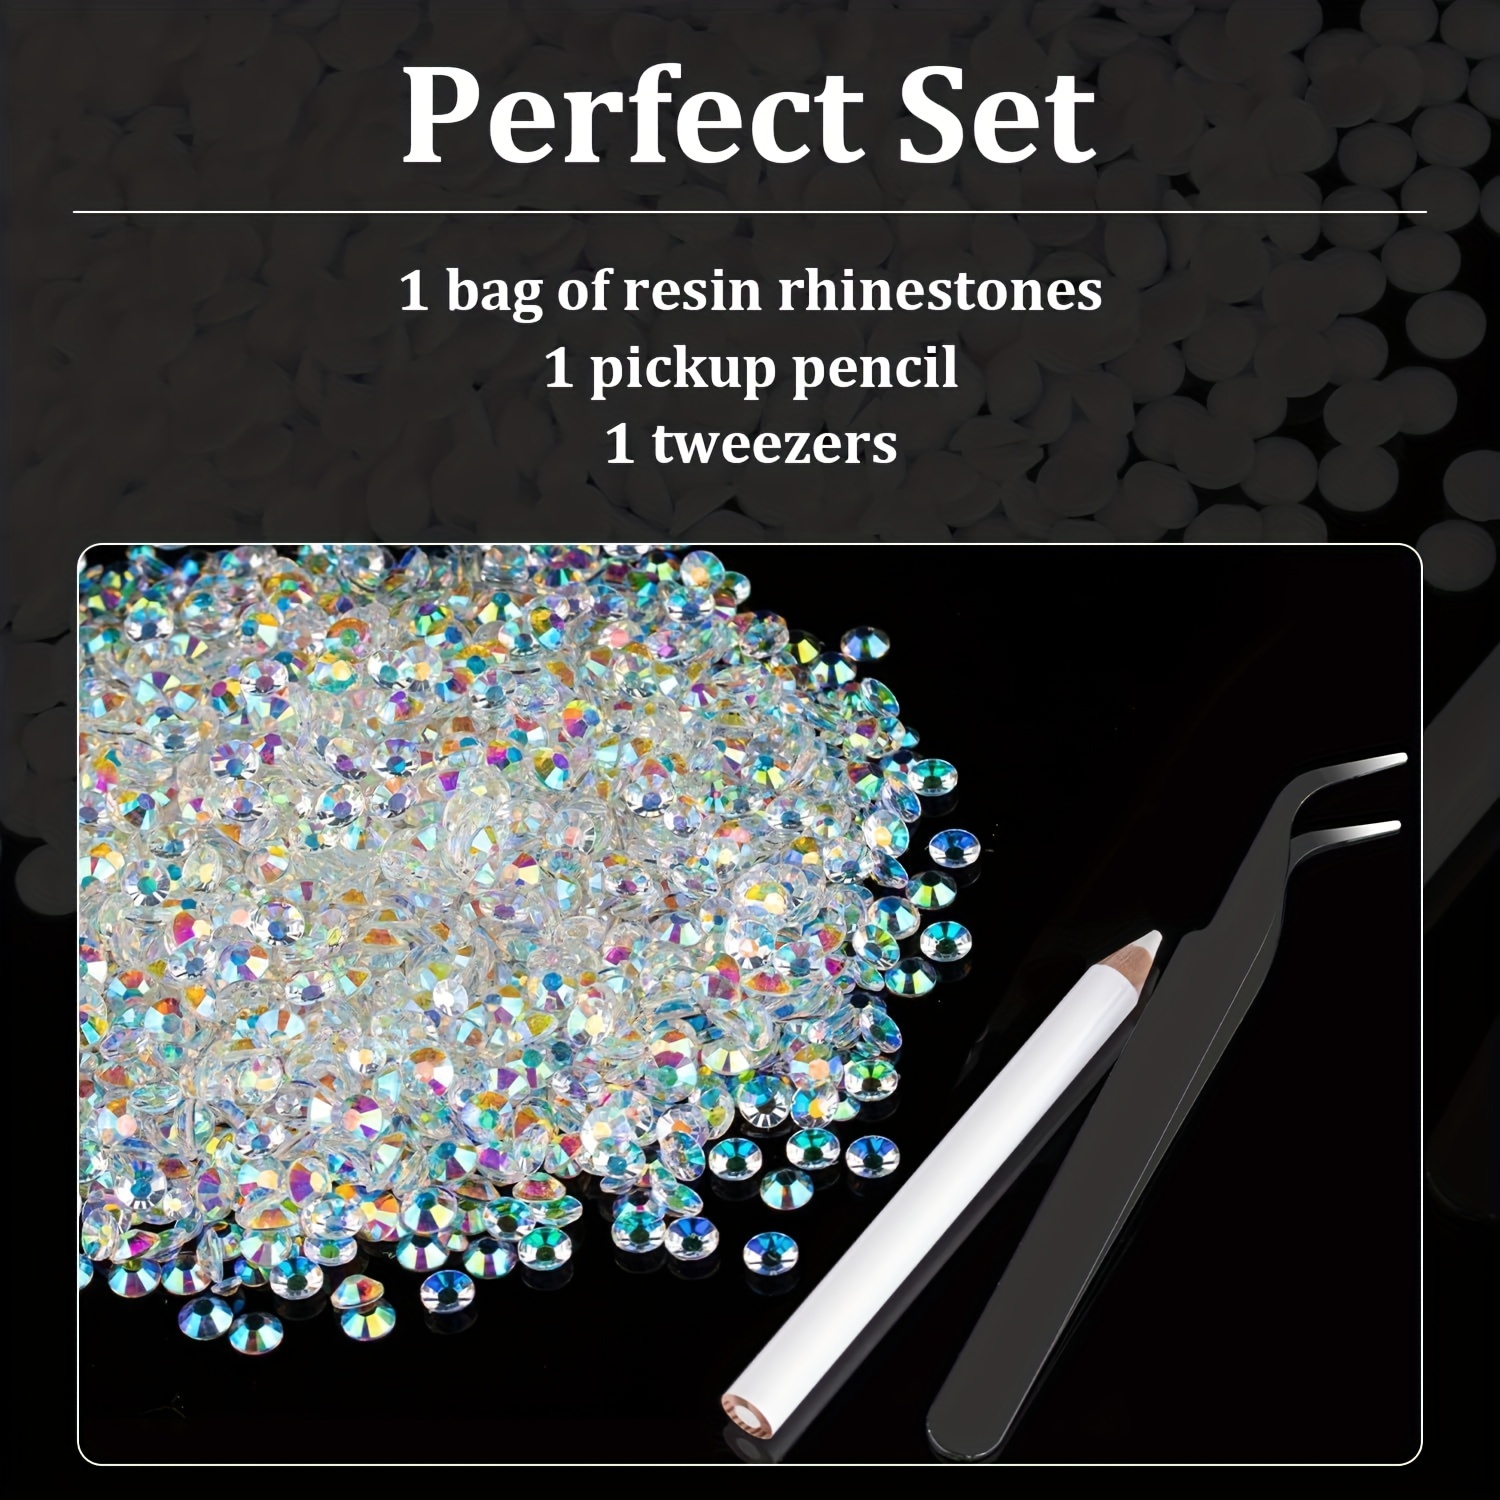  30000 Pcs Flatback Rhinestones for Crafts, Jelly Rhinestones  for Tumblers 4 Size Pink Rhinestones for Nails Round Resin Gem Non-hotfix  Rhinestone for Face Makeup Clothes Shoes : Arts, Crafts & Sewing